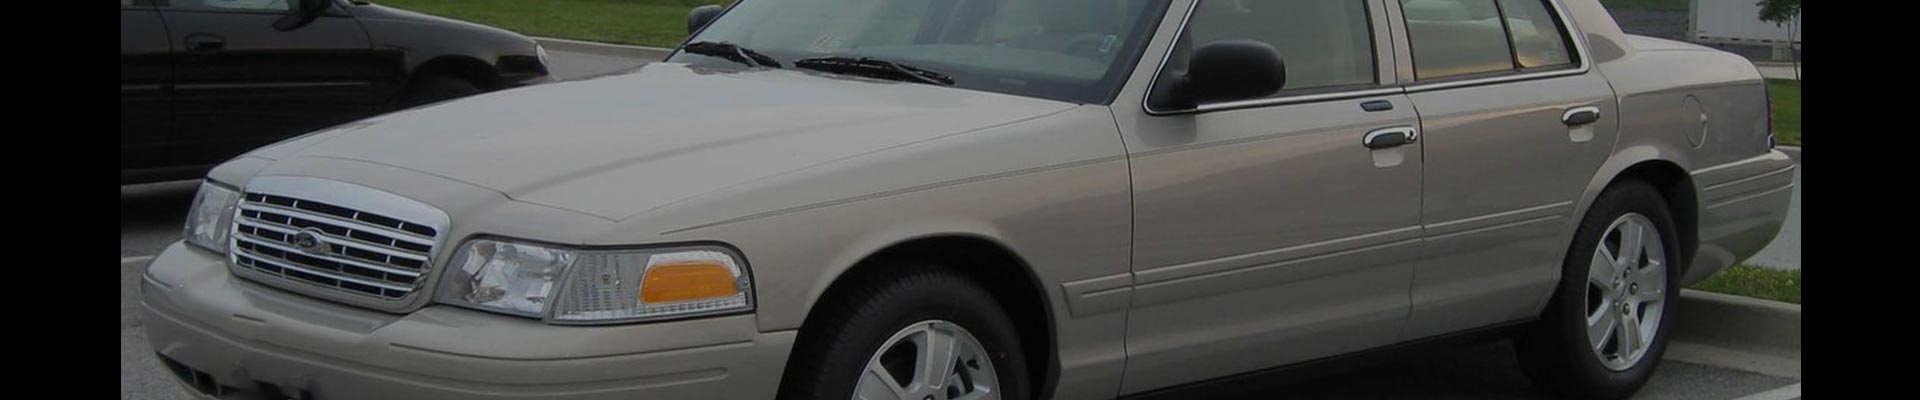 Shop Replacement and OEM 1997 Ford Crown Victoria Parts with Discounted Price on the Net